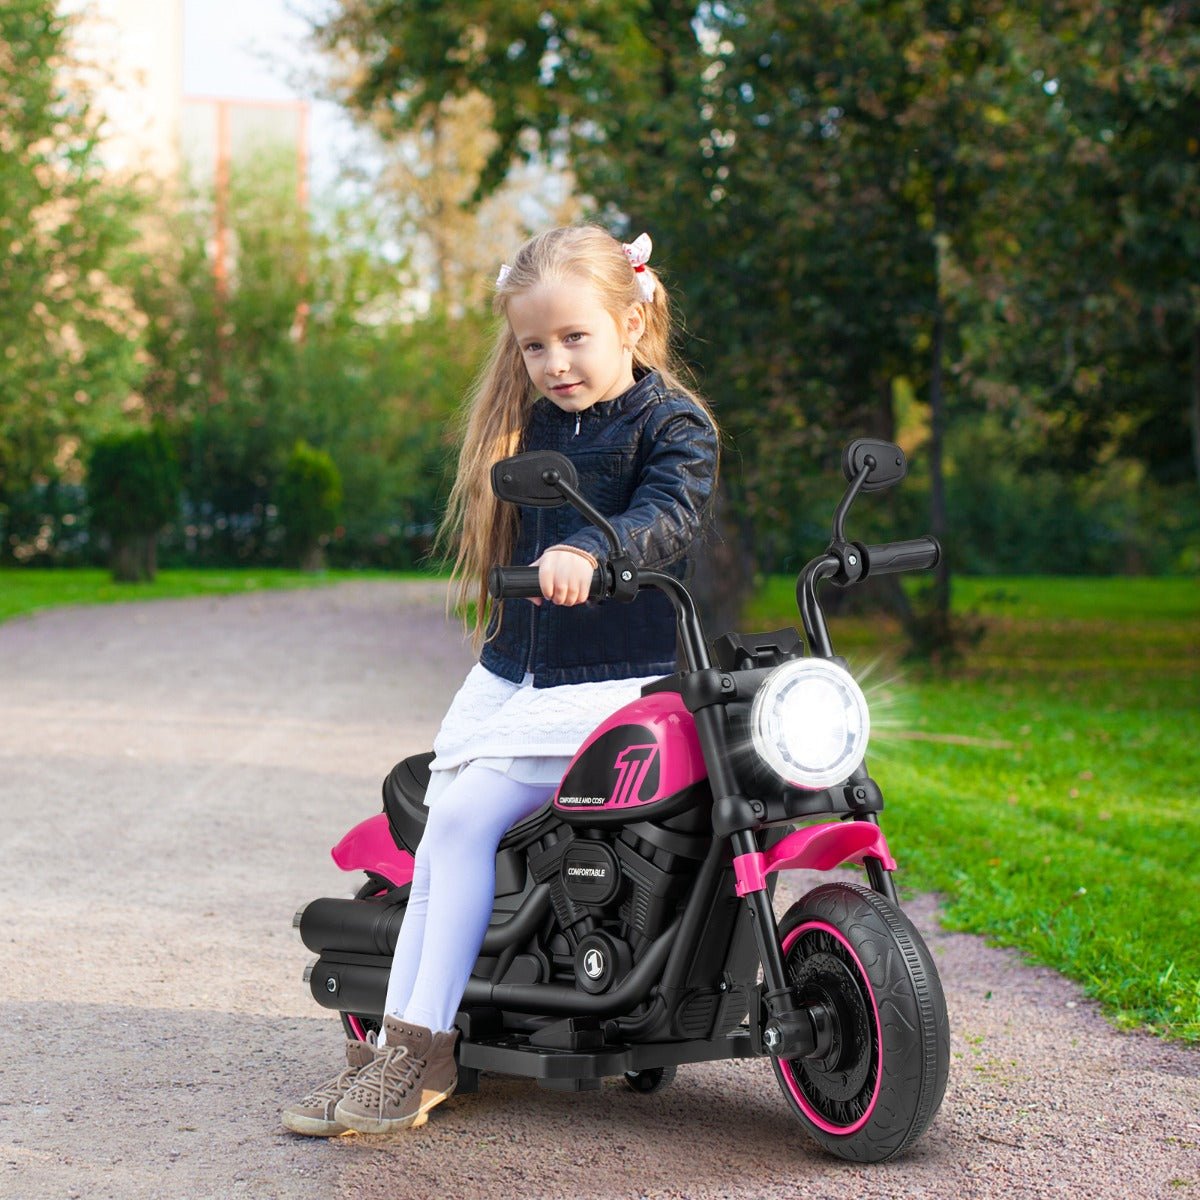 Princess of the Road: Pink Electric Motorbike